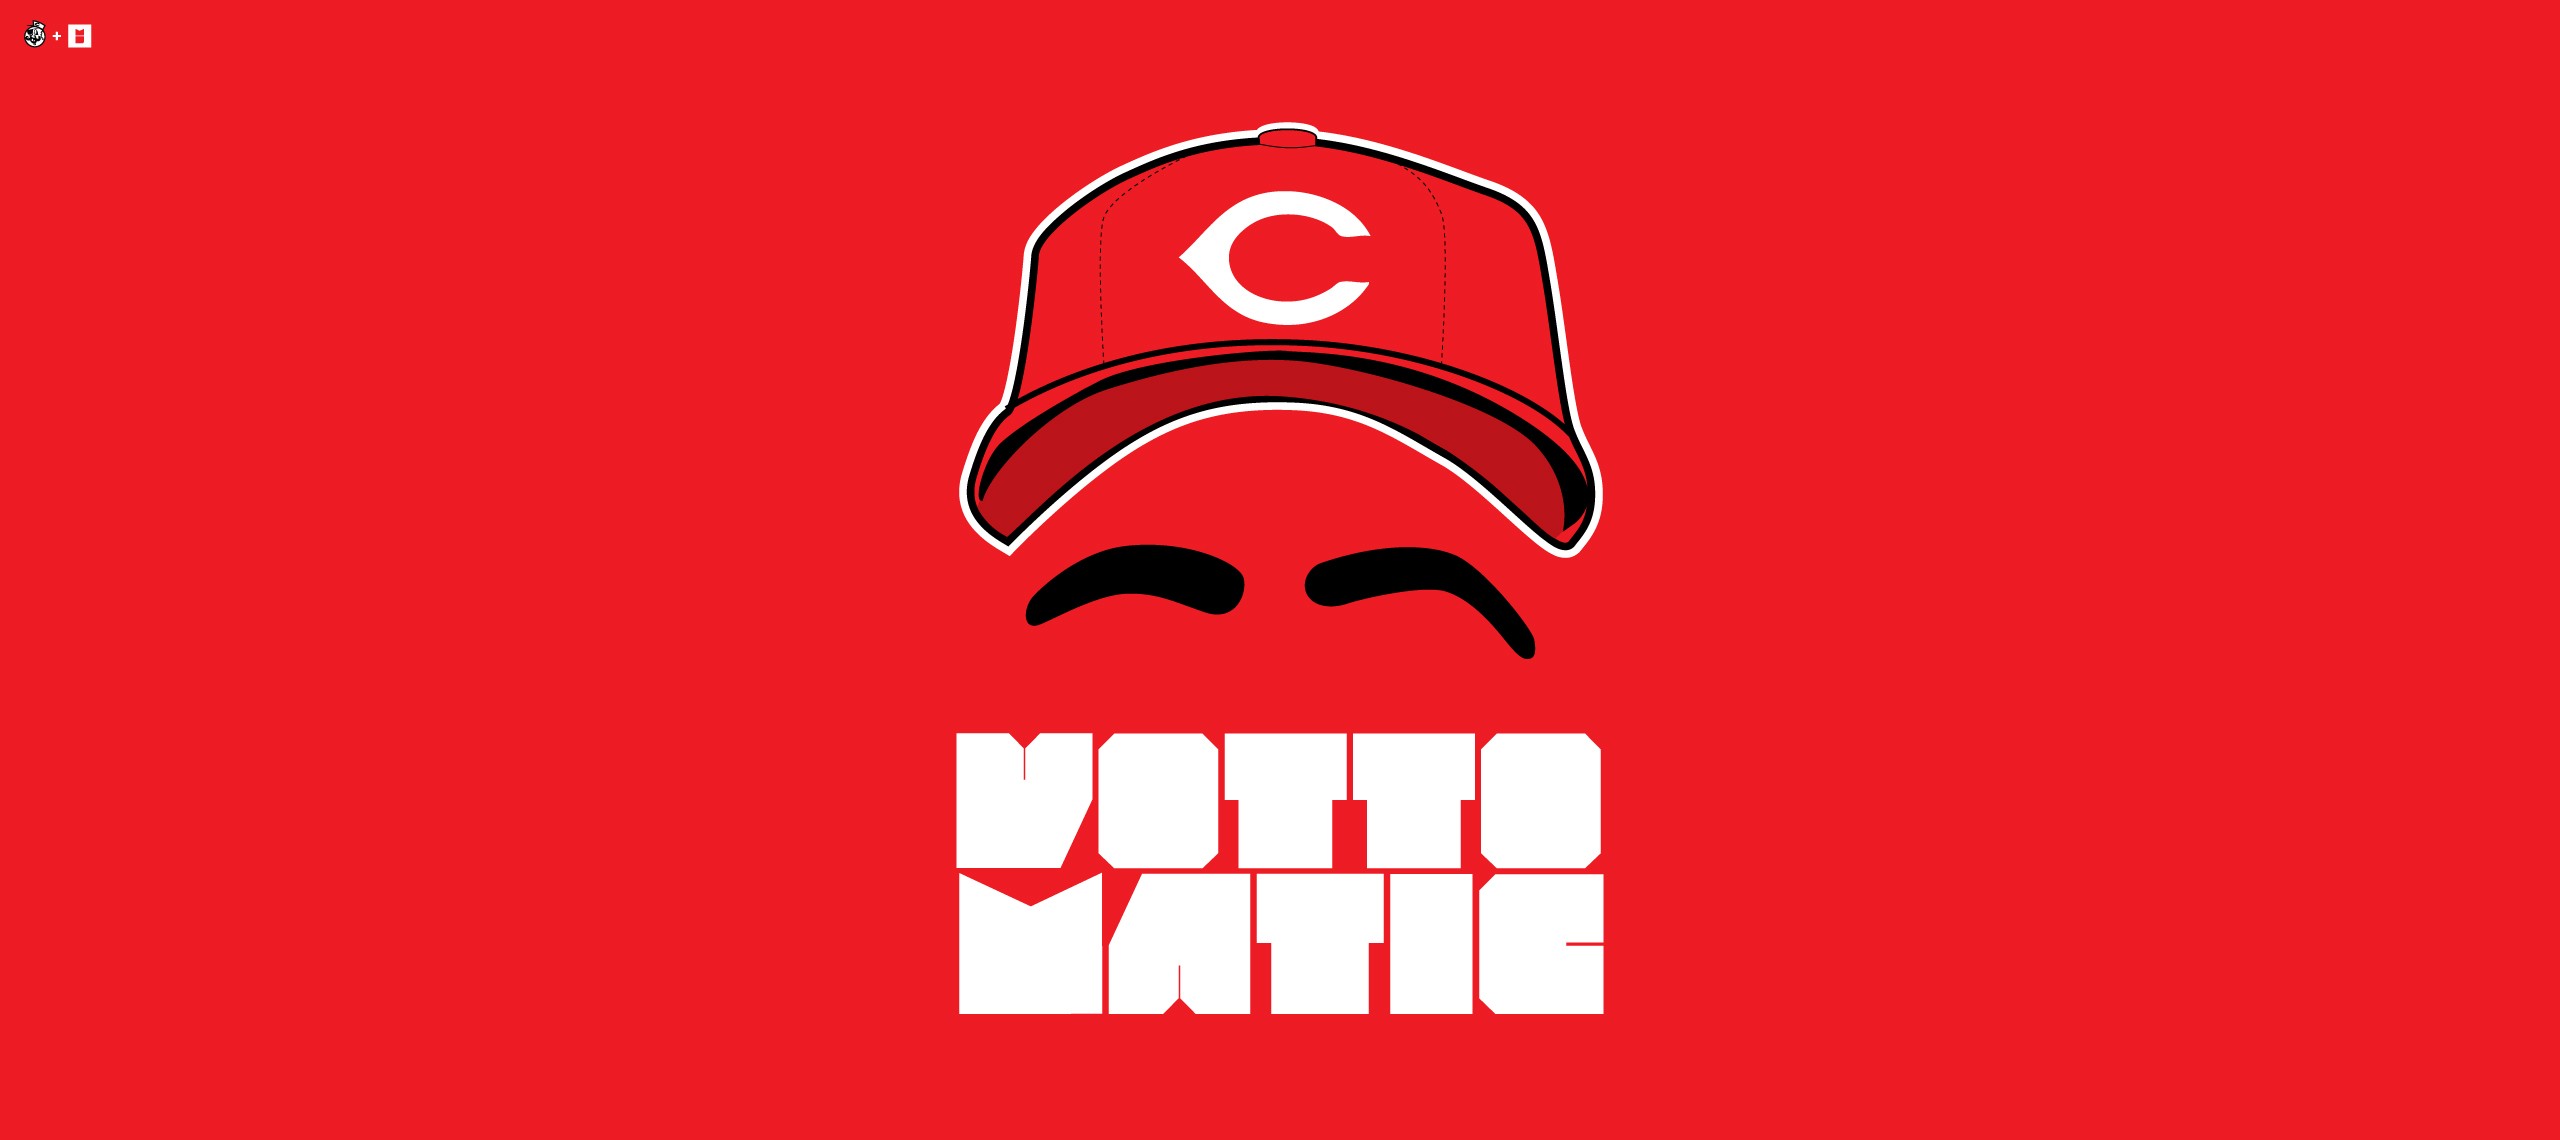 General 2560x1140 Cincinnati Reds baseball red red background red hats sport simple background